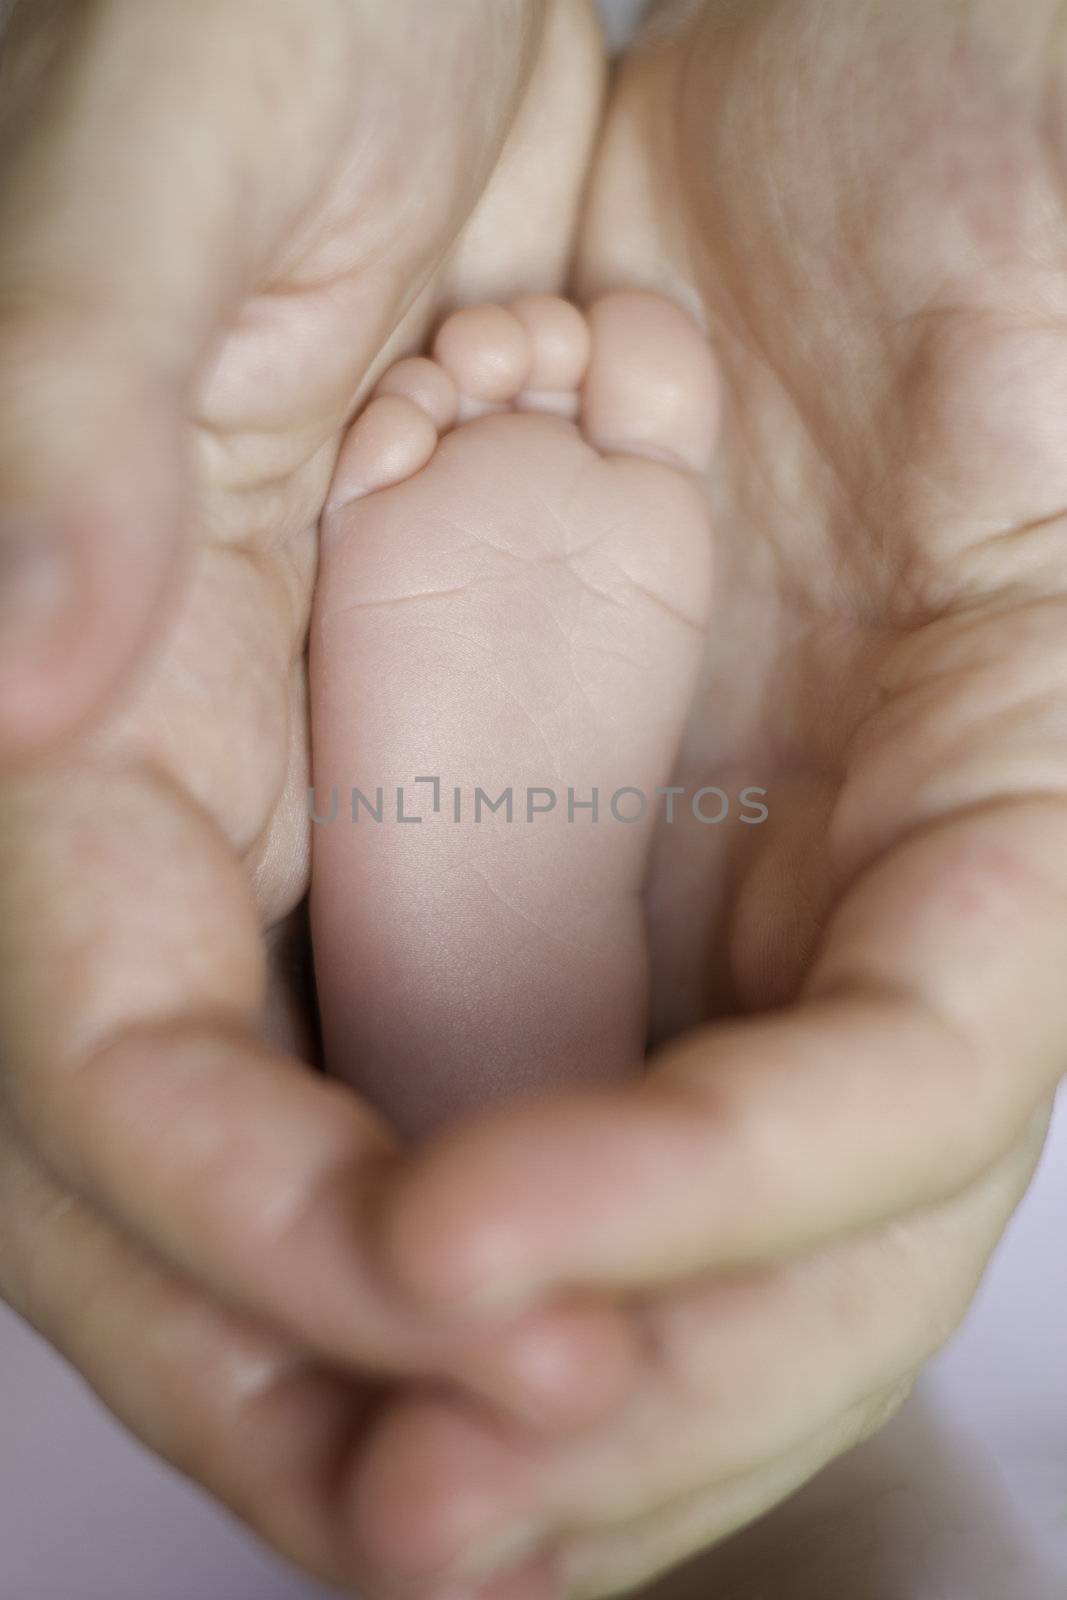 8 days old girl's feet in her mother's hands, very tiny toes with shallow depth of field. Vertical.